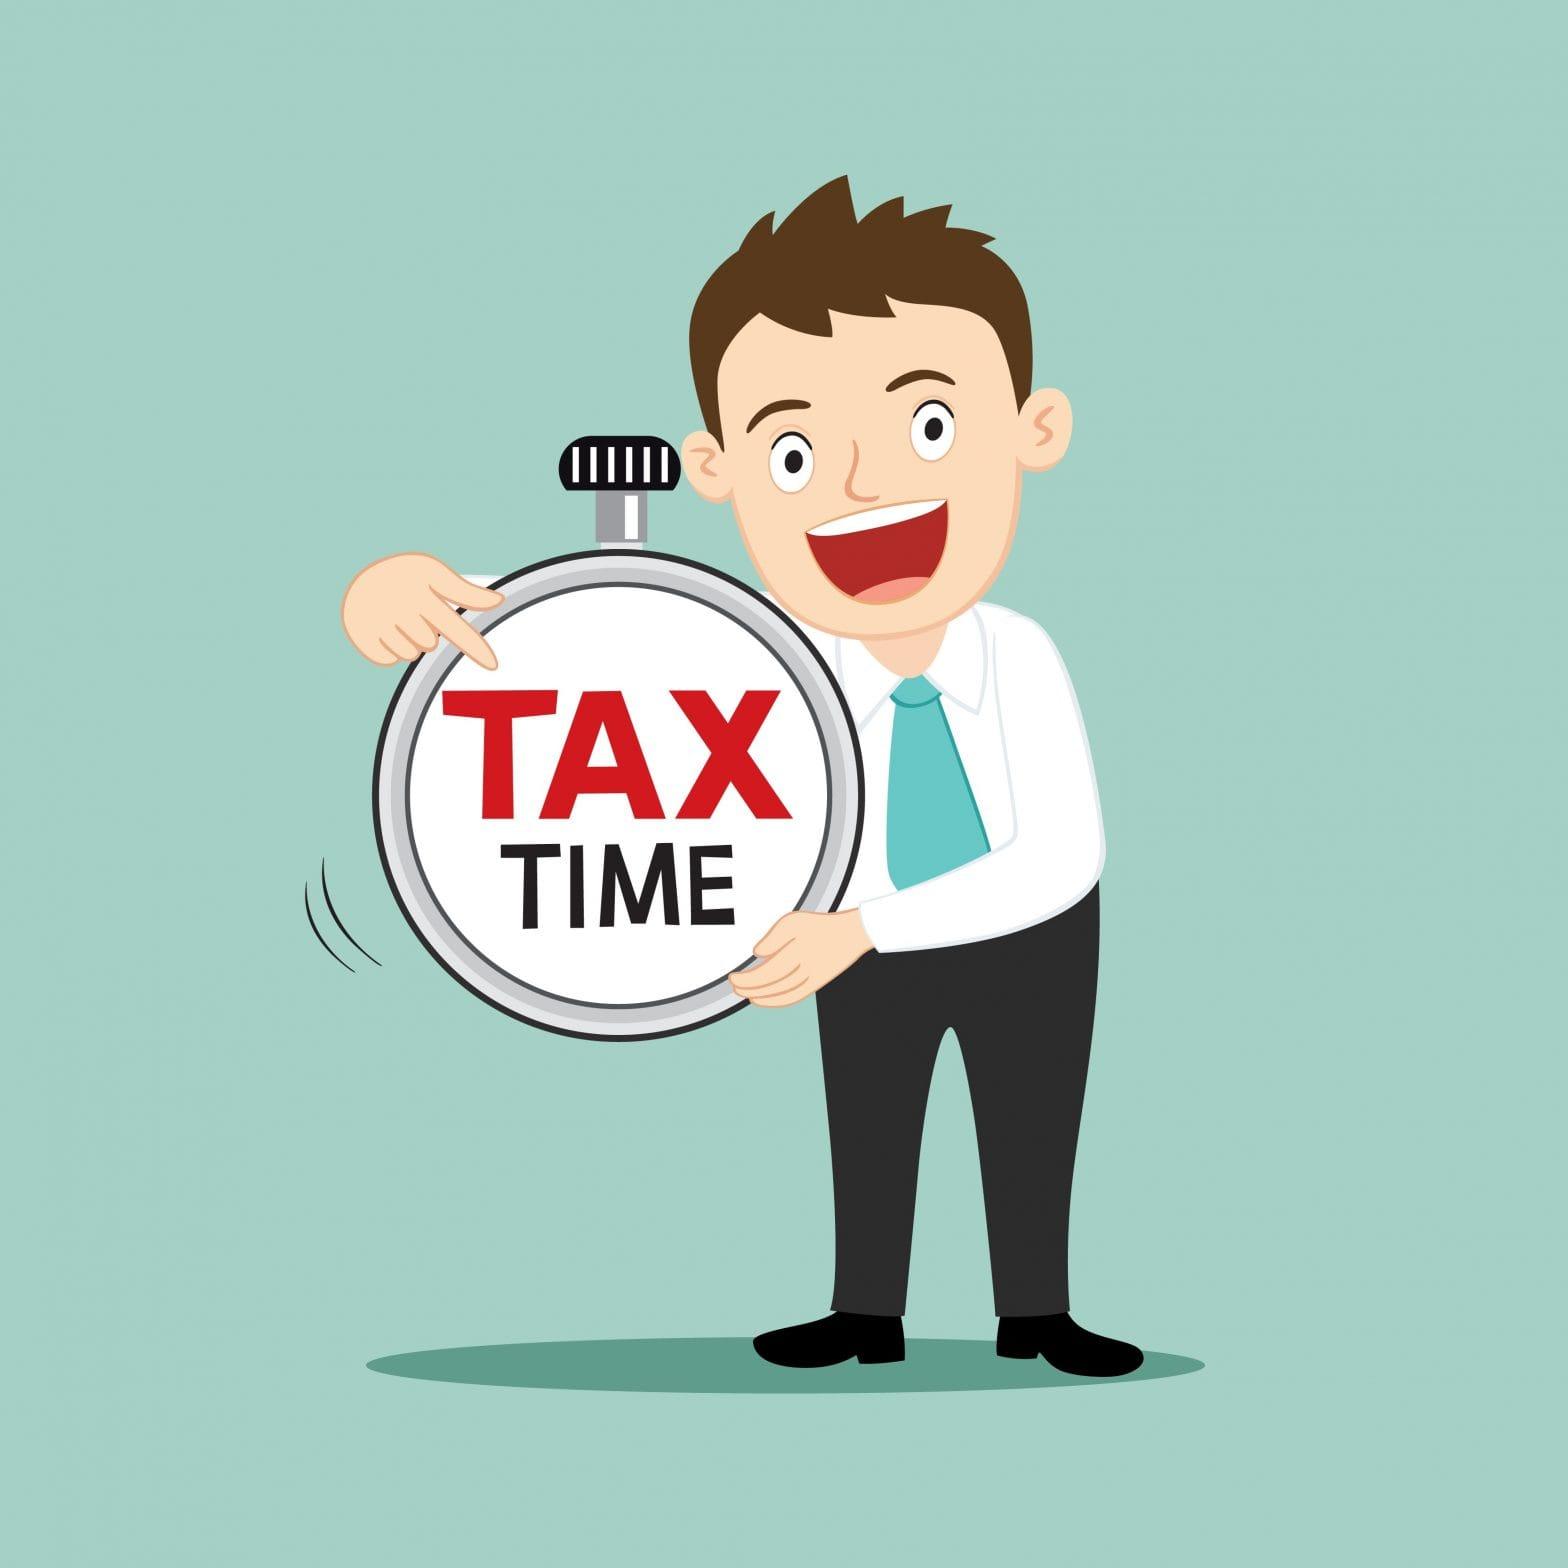 5 Tax Tips Your Workforce Should Know